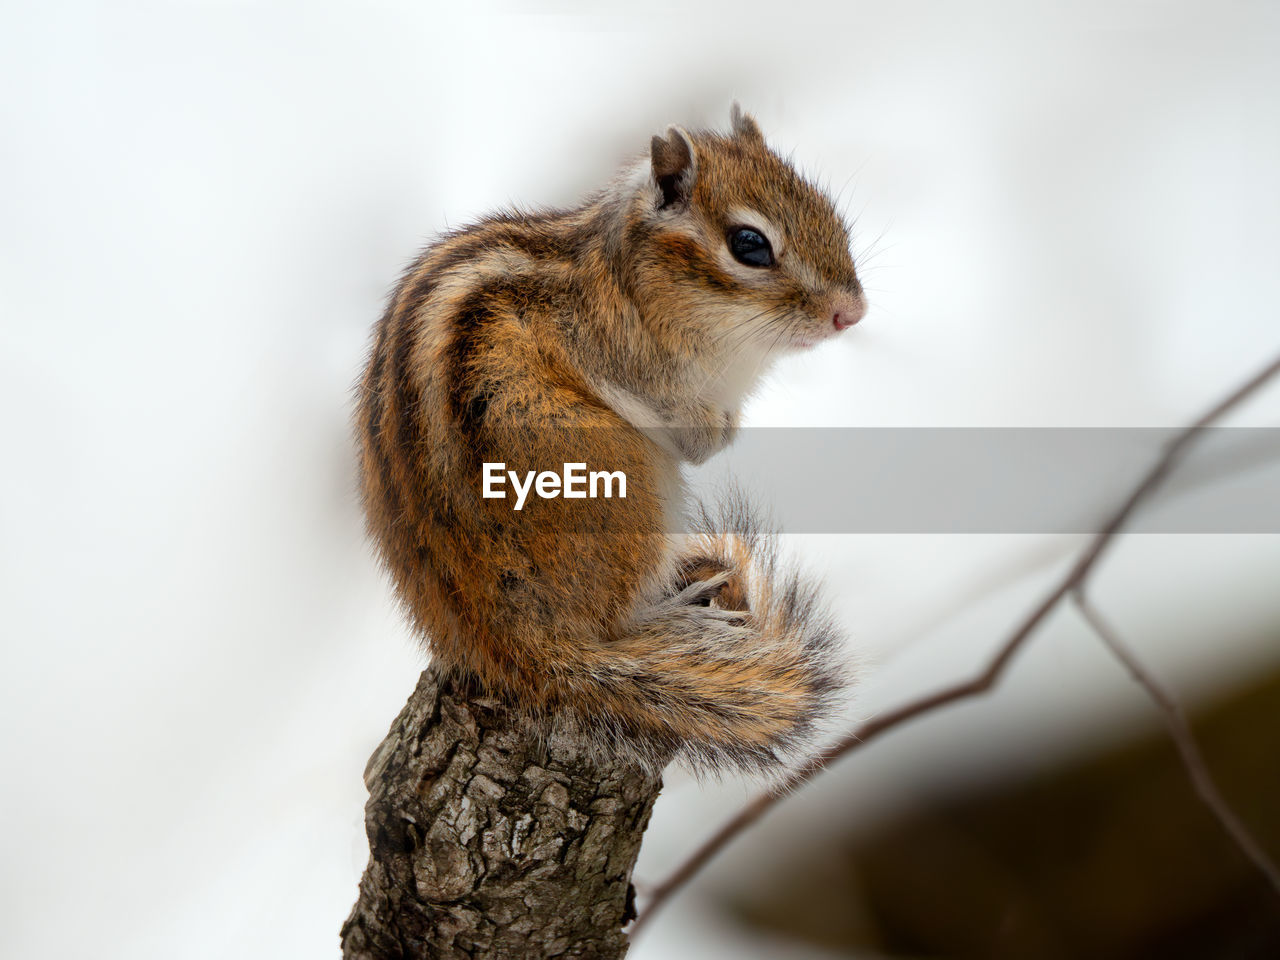 close-up of squirrel on branch